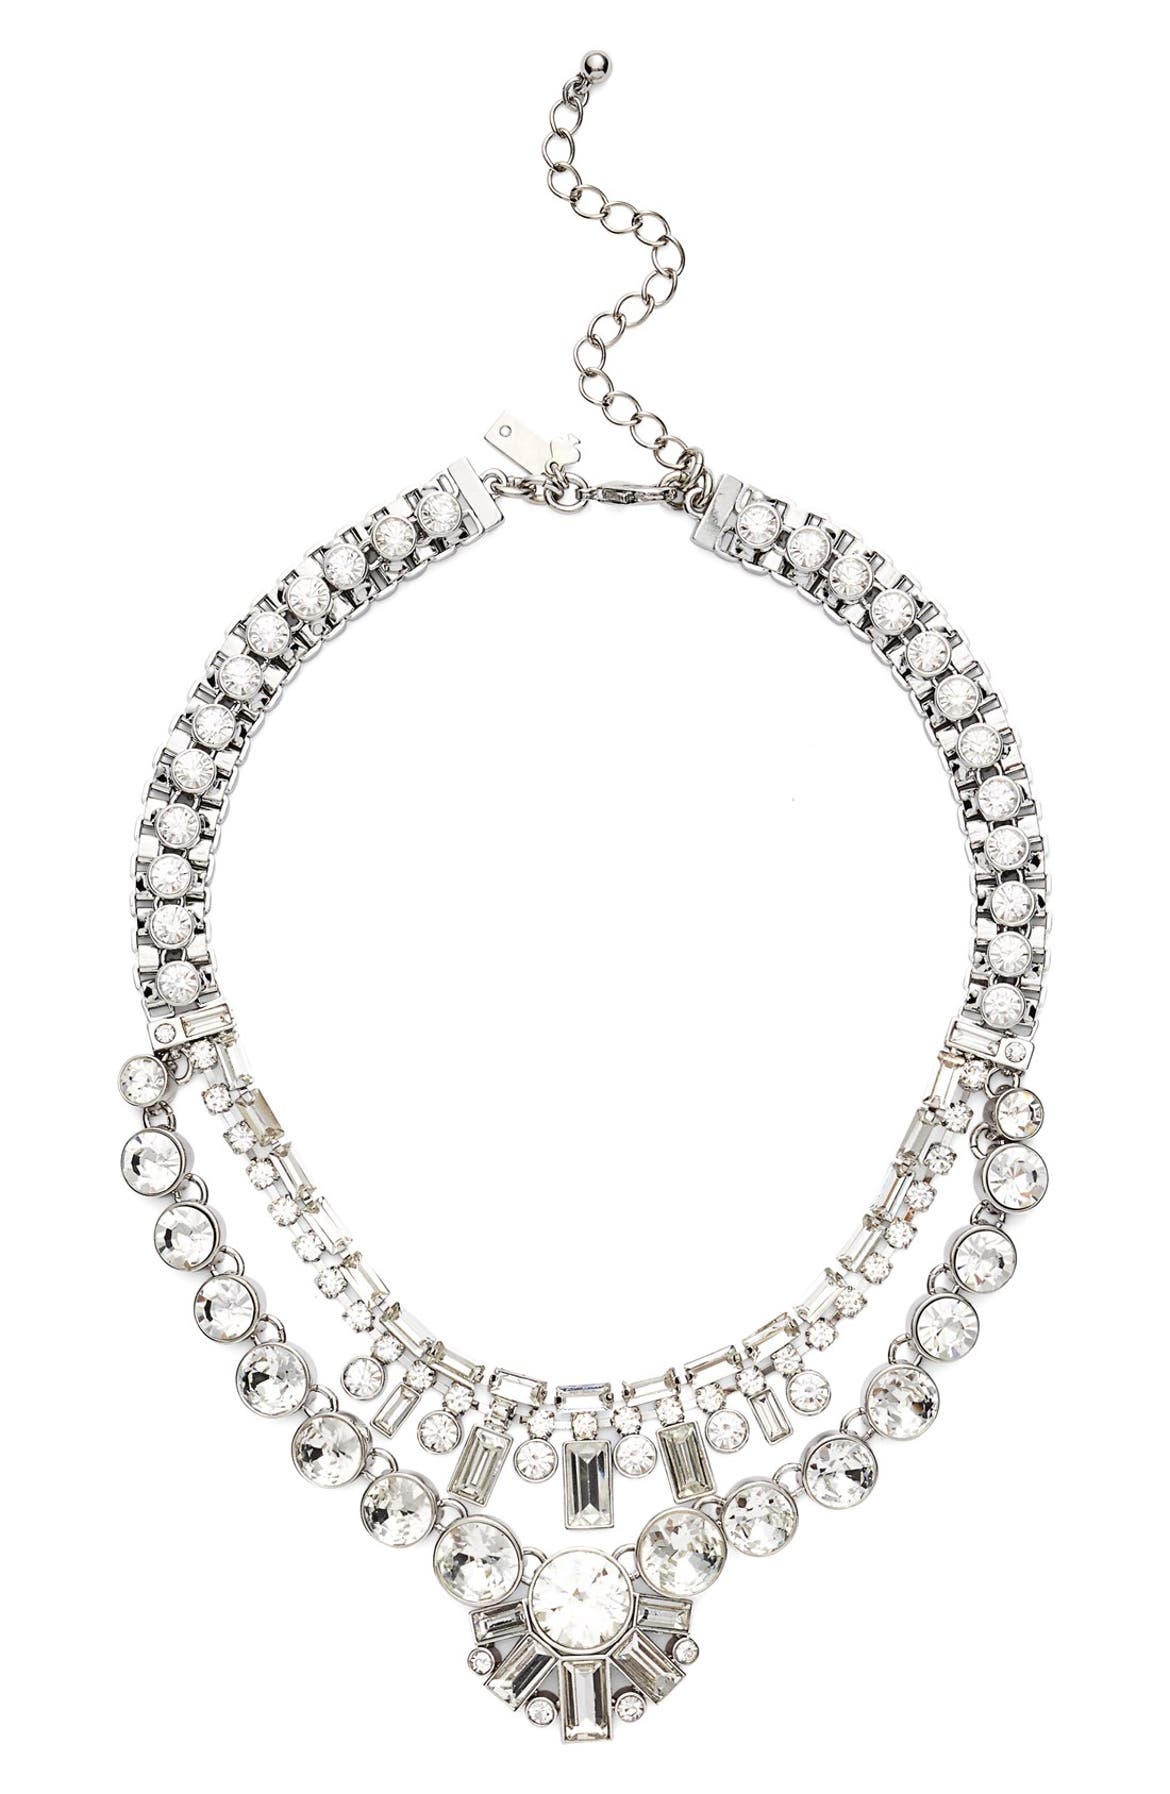 kate spade new york 'clink of ice' multilayered necklace | Nordstrom